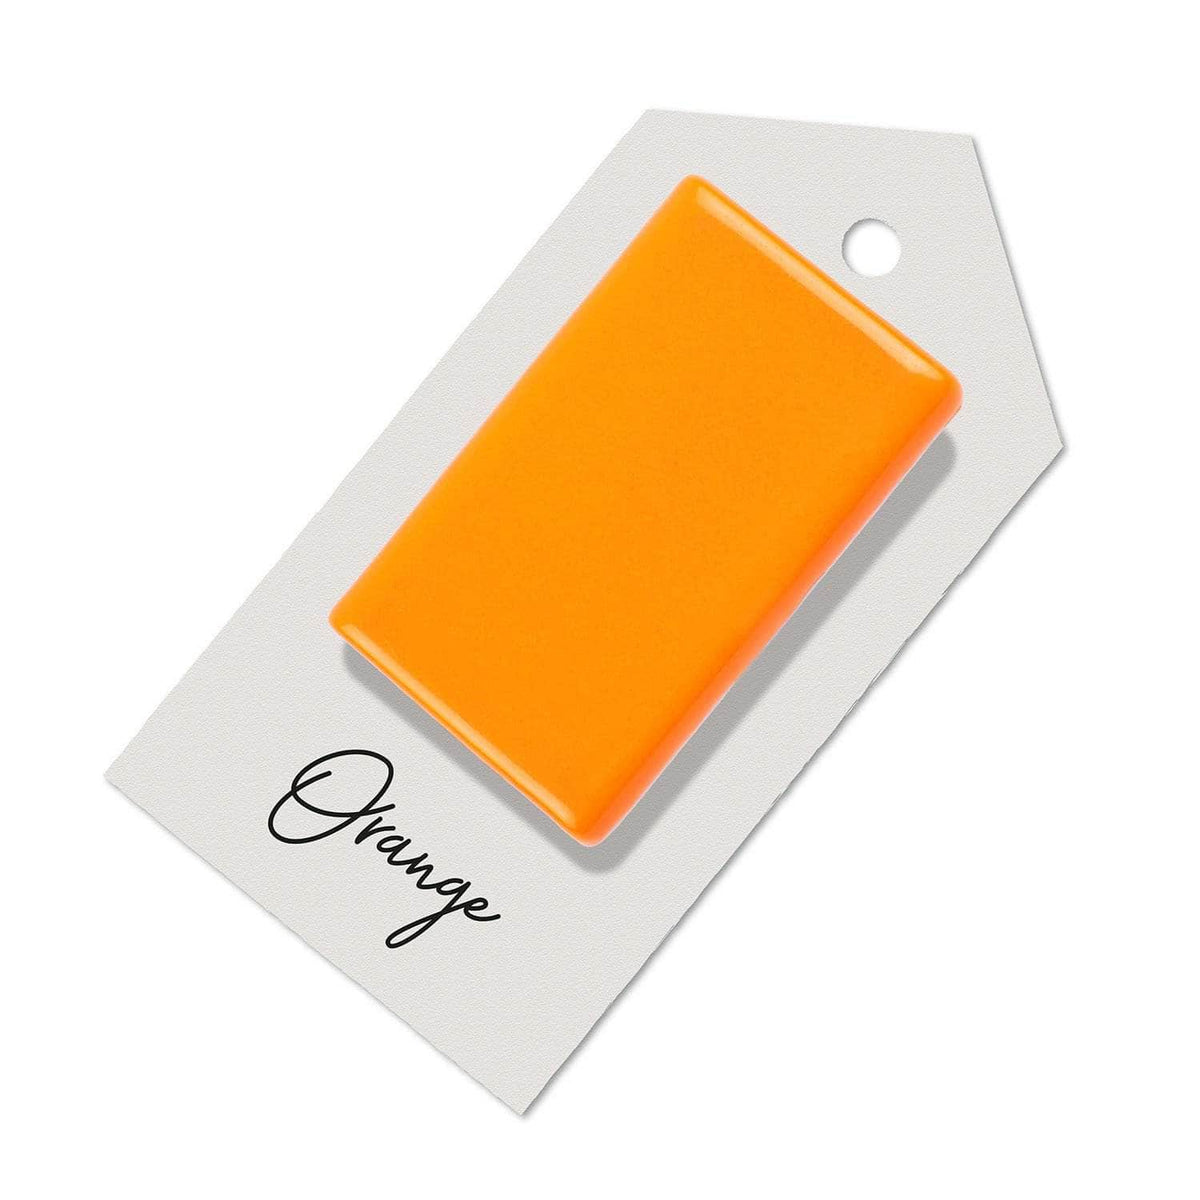 Orange sample for Aga range cooker re-enamelling &amp; reconditioned cookers